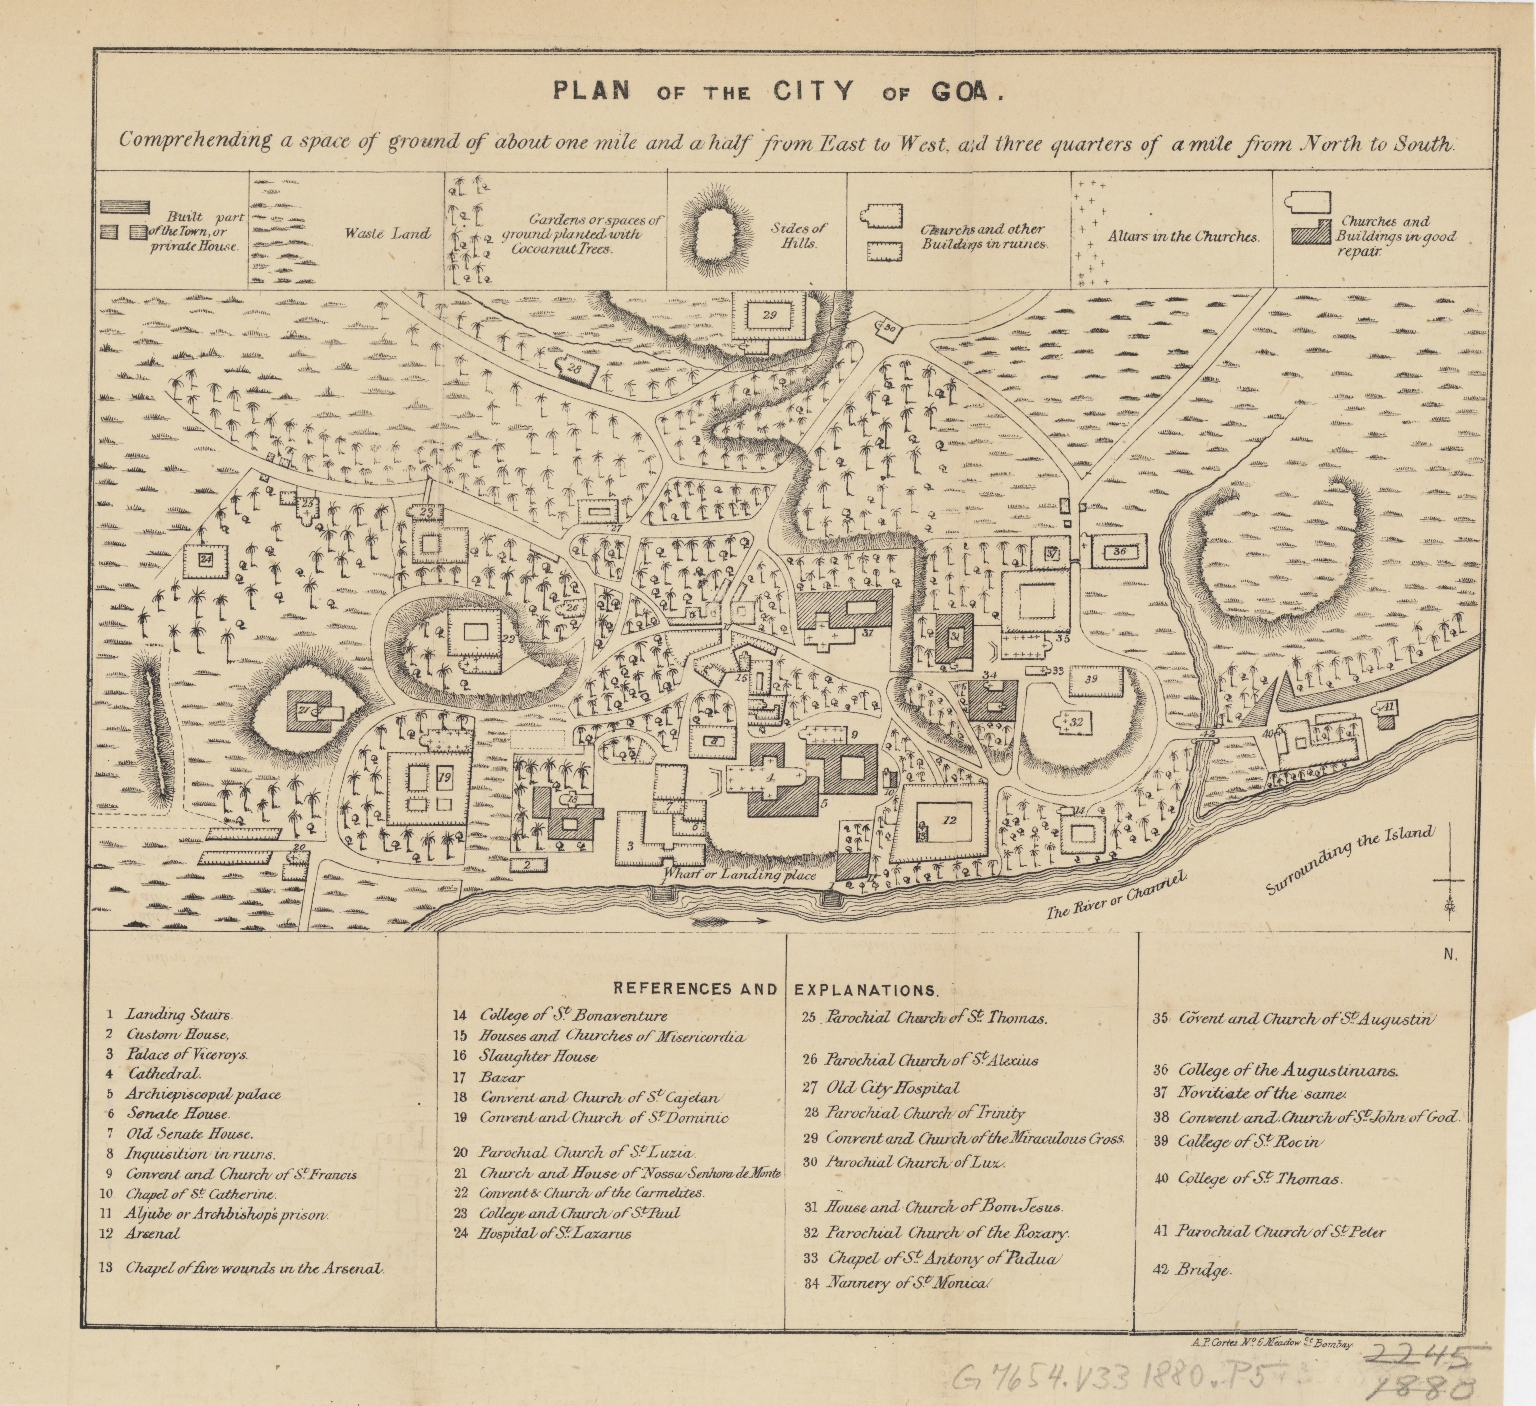 Plan of the city of Goa : comprehending a space of ground of about one mile and a half from east to west, and three quarters from north to south